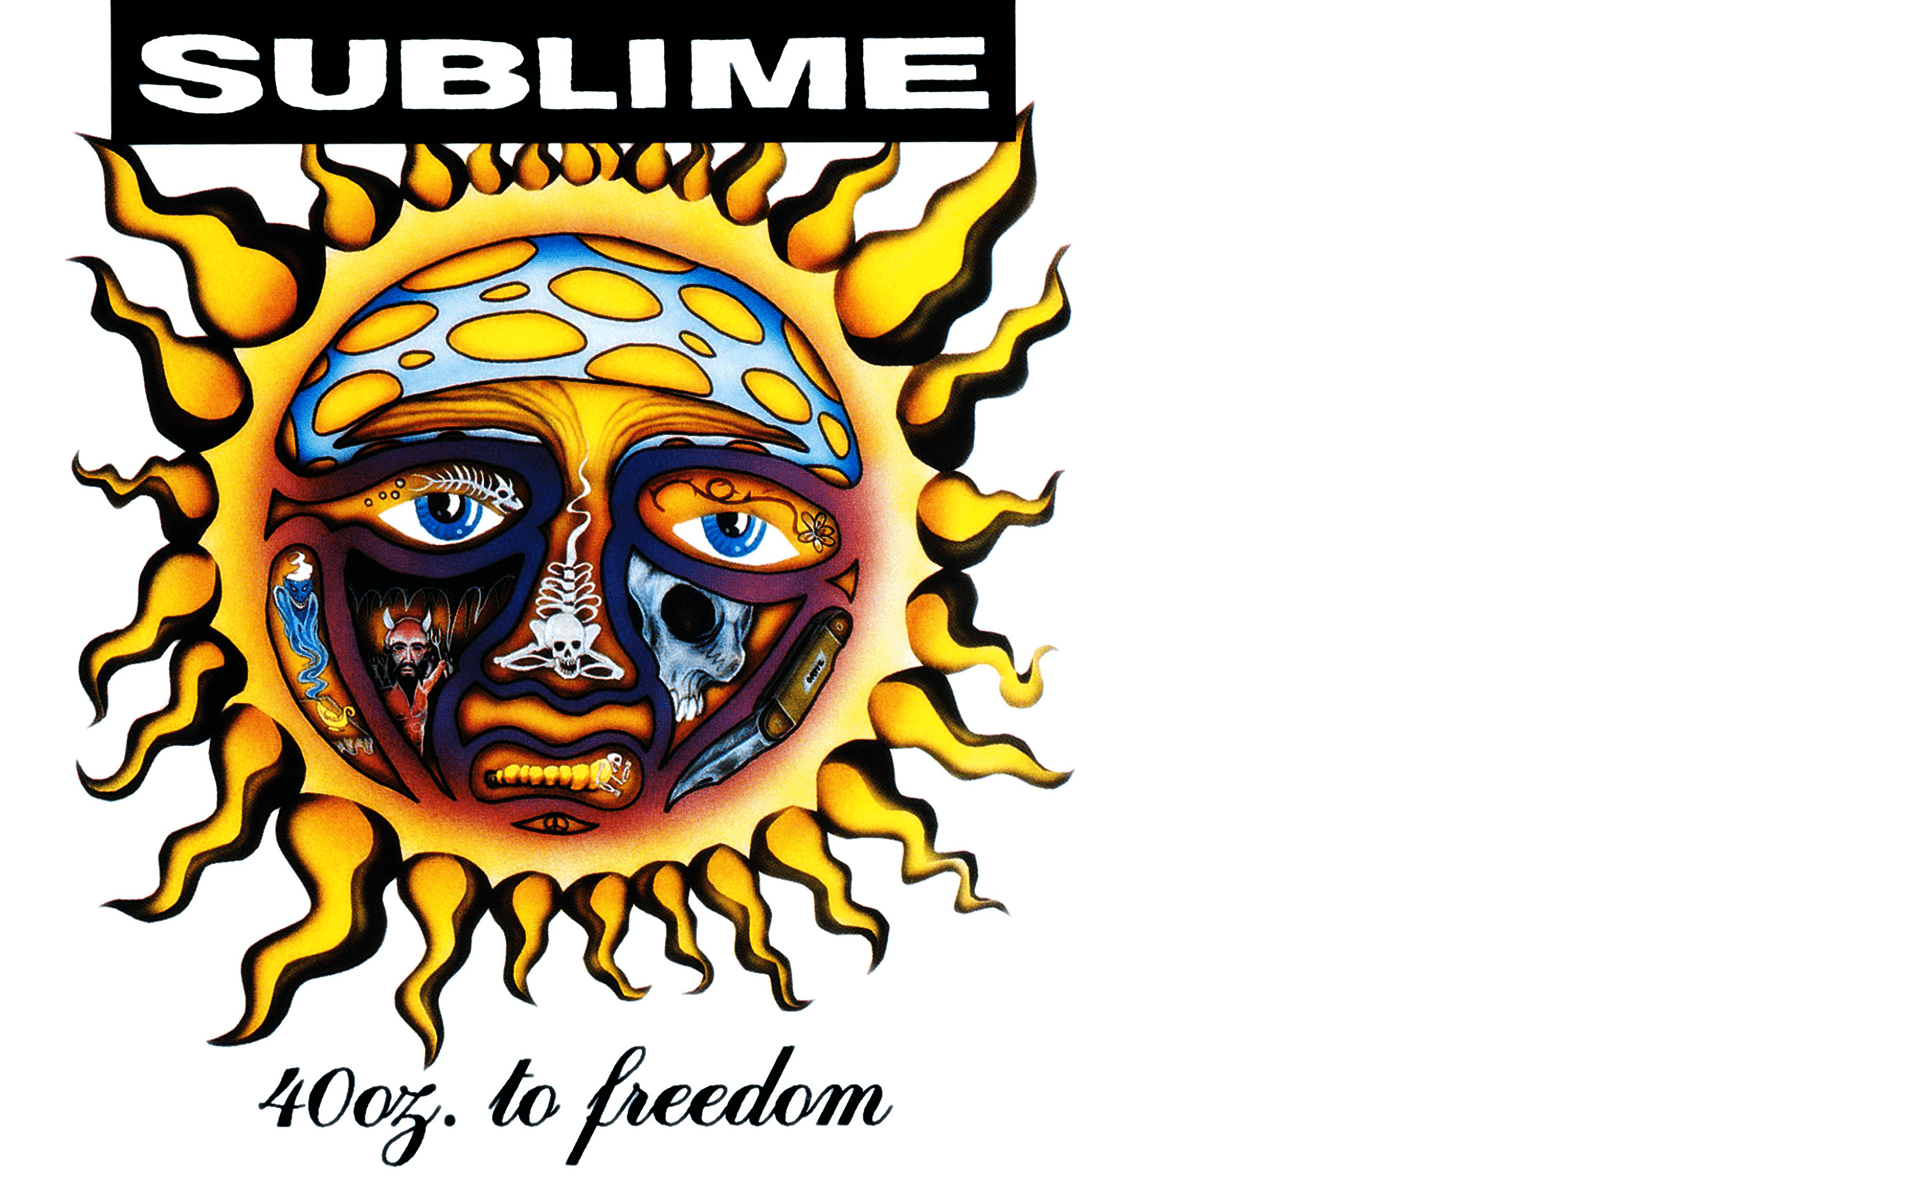 download sublime greatest hits